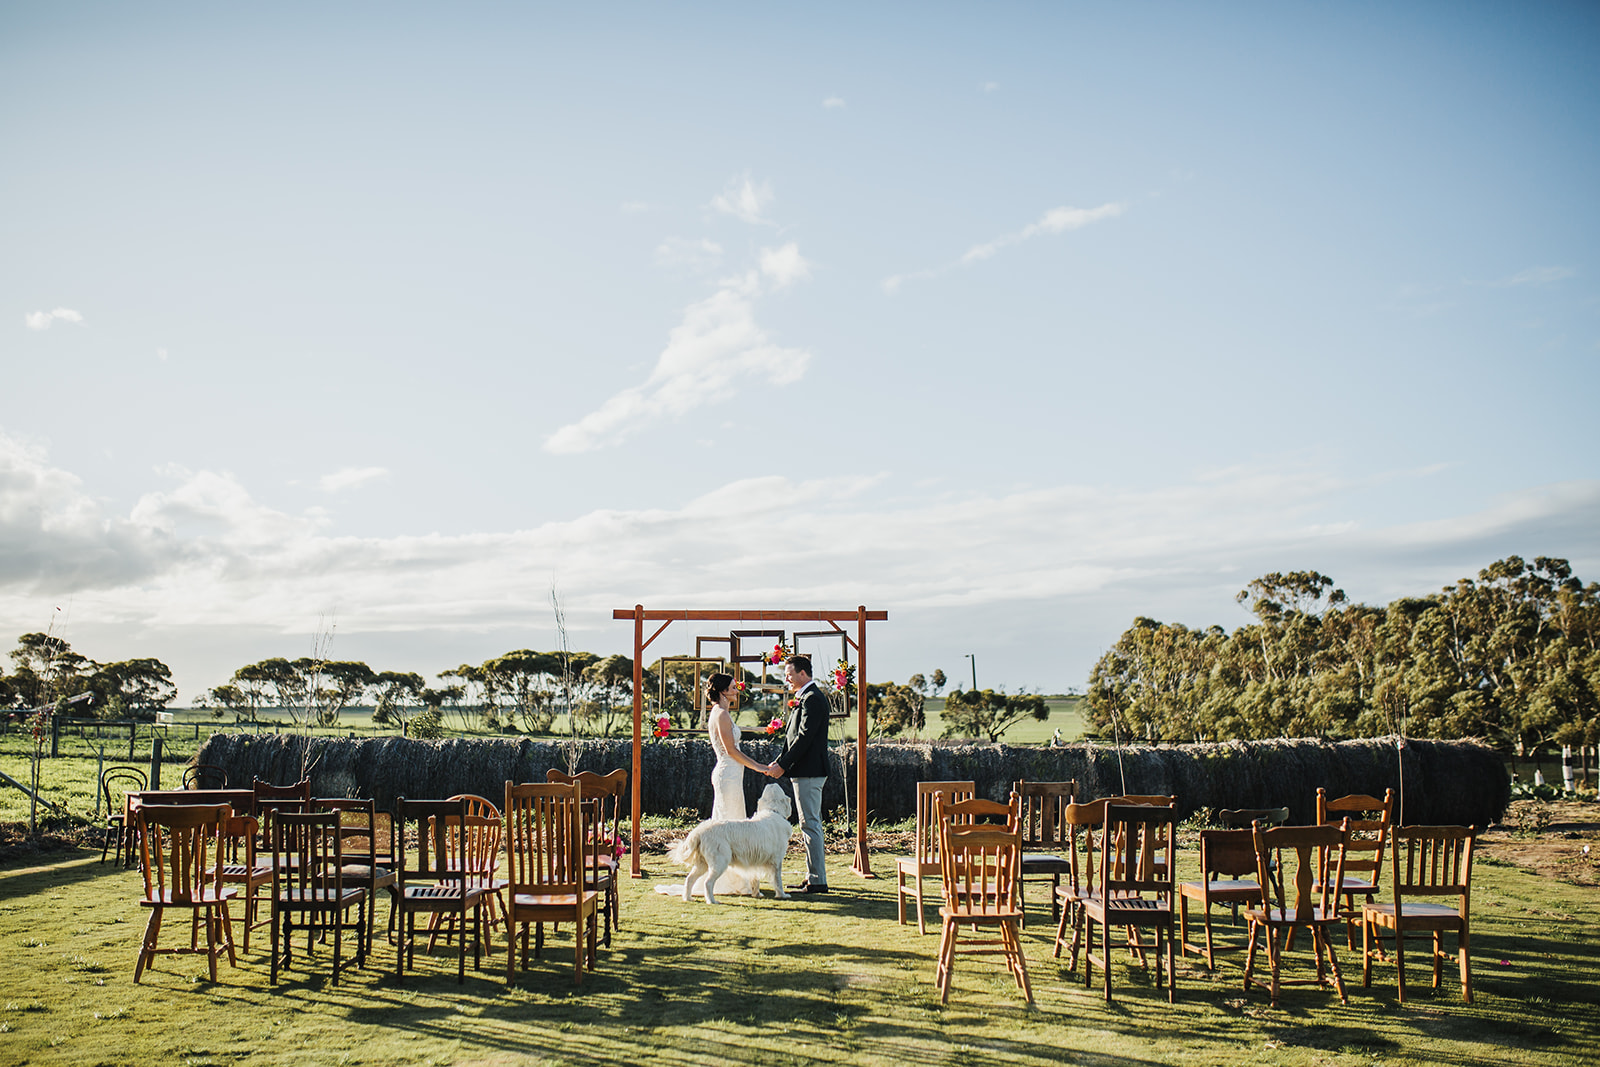 Redwing Farm Styled Shoot, Yorke Peninsula Destination Wedding Venue in the South Australian Countryside suitable for ceremony and reception with accommodation on site.